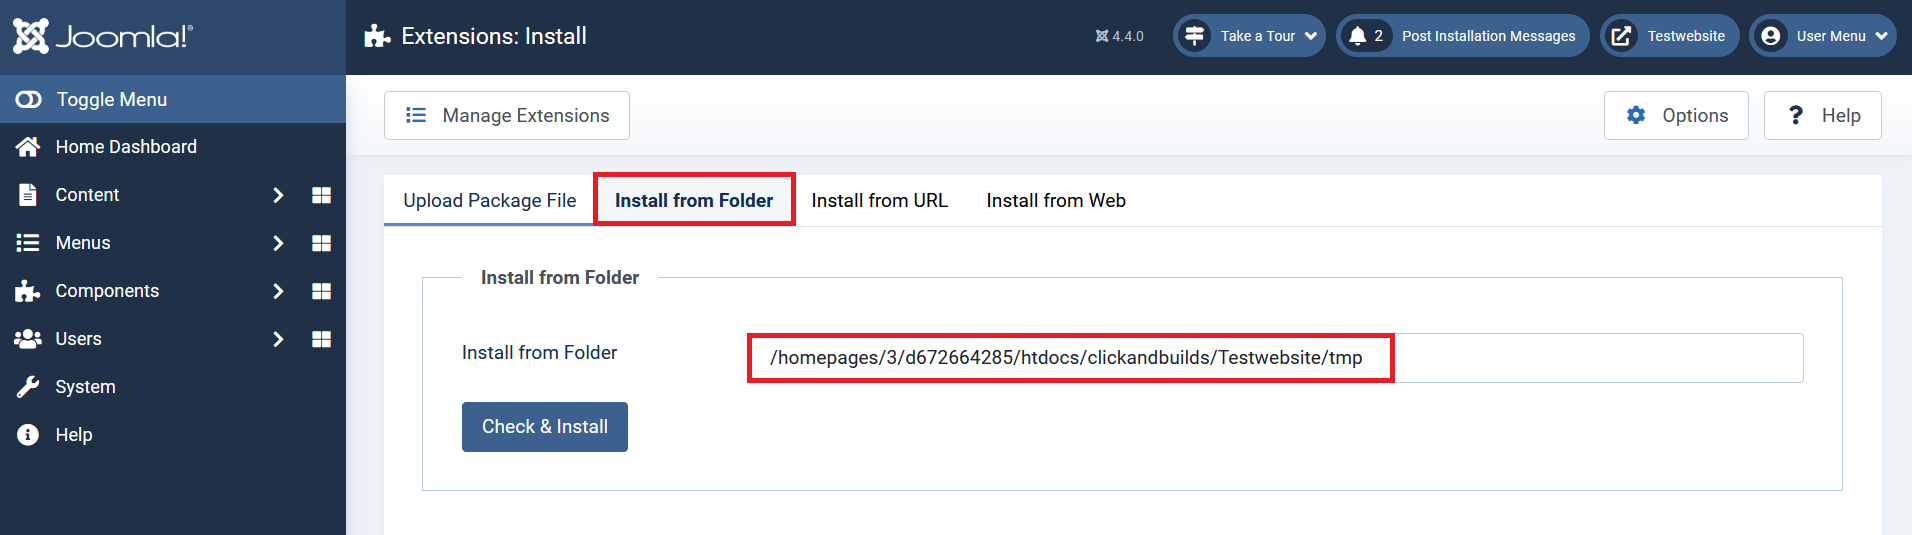 Joomla backend: Option to install from a folder